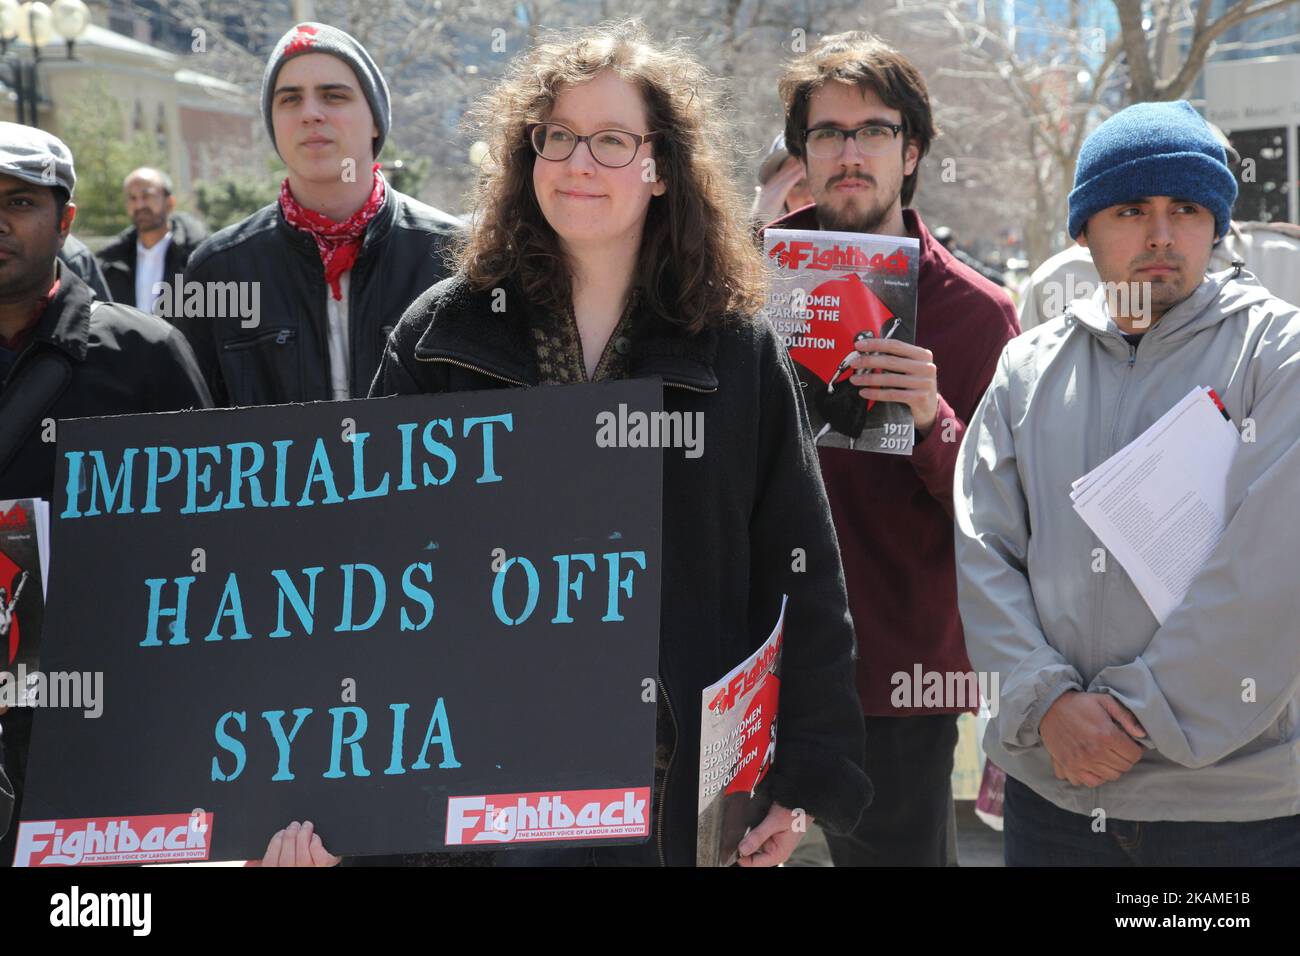 Woman holds a sign saying 'Imperialist Hands Off Syria' during a protest against US President Donald Trump's decision to launch airstrikes against Syria on April 8, 2017 in Toronto, Ontario Canada. Protestors gathered to outside the American Consulate in Toronto to denounce this week's airstrikes against the Syrian regime. America launched a missile strike against Syria for the first time since the civil war began, targeting an airbase in the small town of Idlib from which the United States claims this week’s chemical weapons attack on civilians was launched by Bashar al-Assad’s regime. (Photo Stock Photo